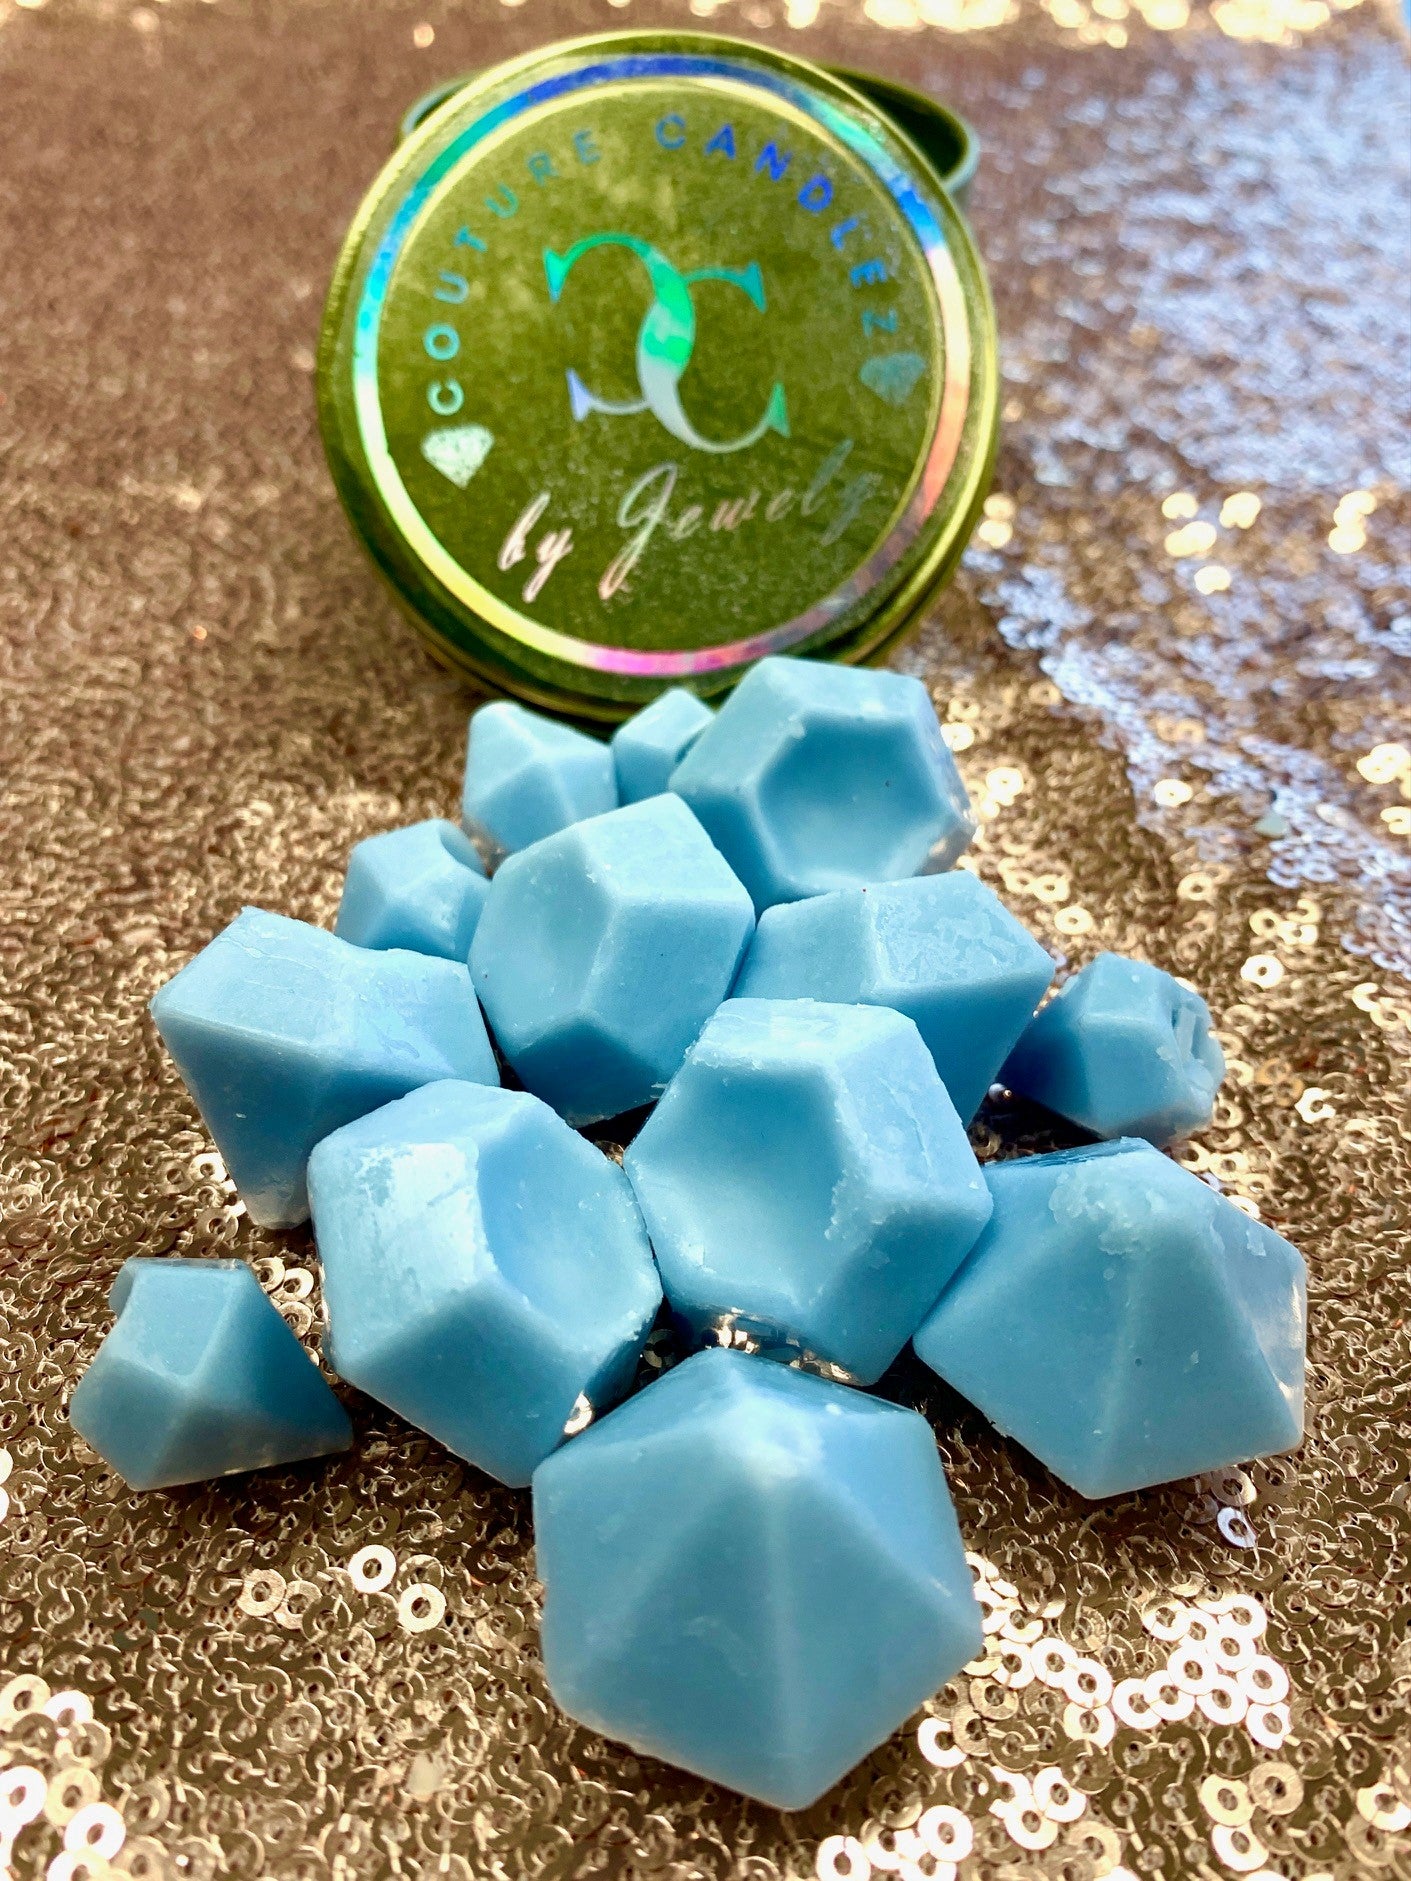 Couture Candlez by Jewelz luxury wax melts with notes of cotton, neroli, & rain (Saint Sapphire)